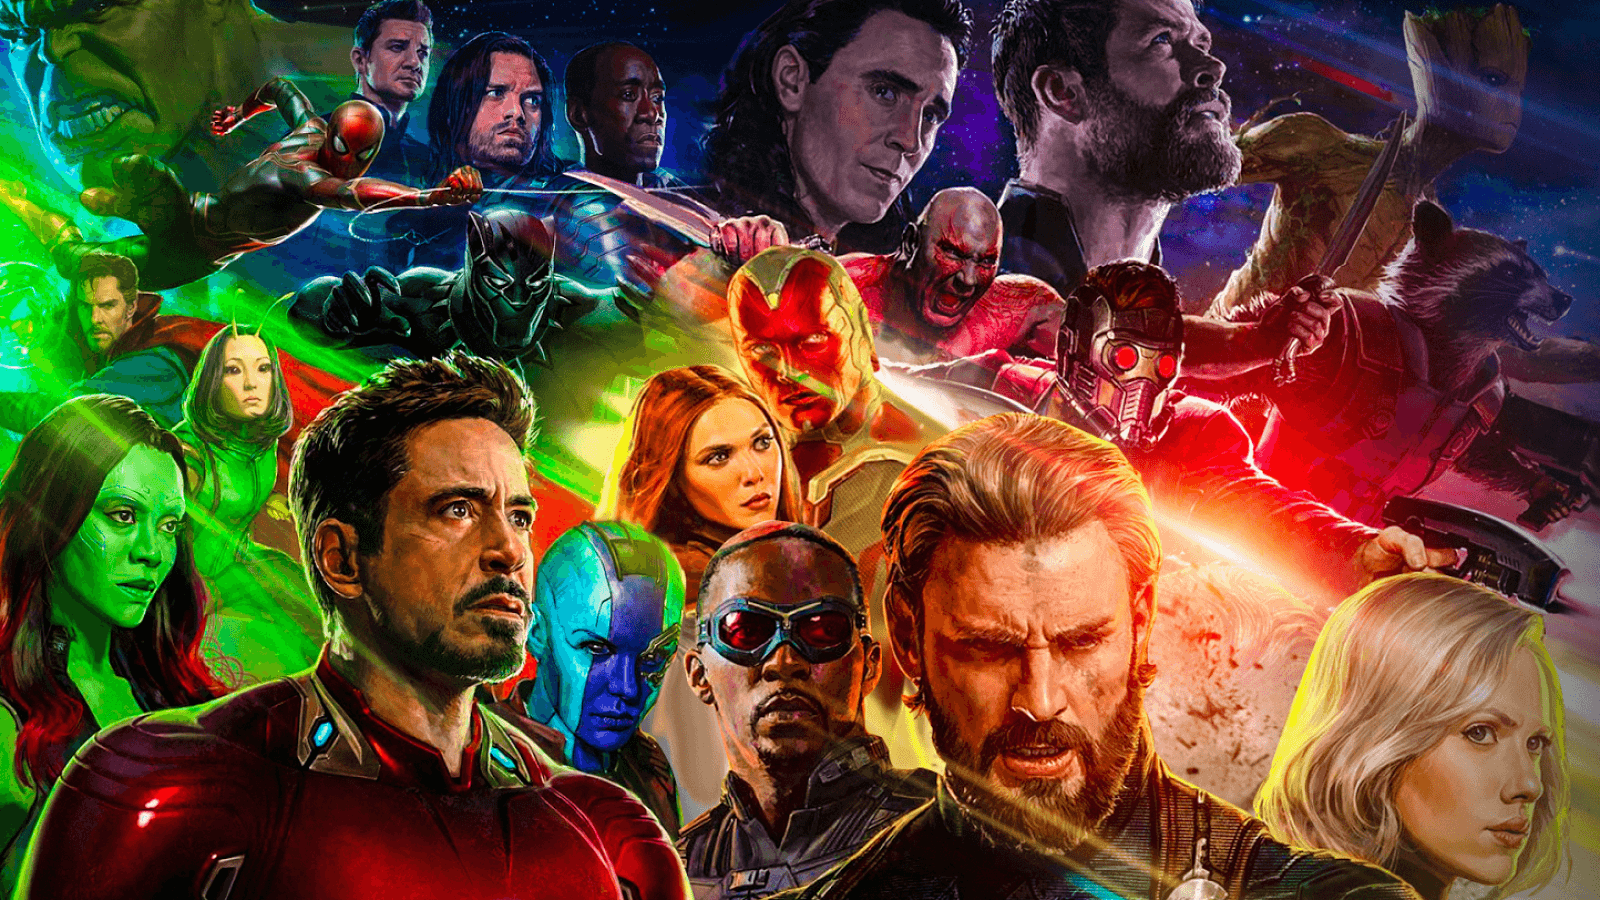 Avengers: Infinity War Wallpaper and Background Imagex900